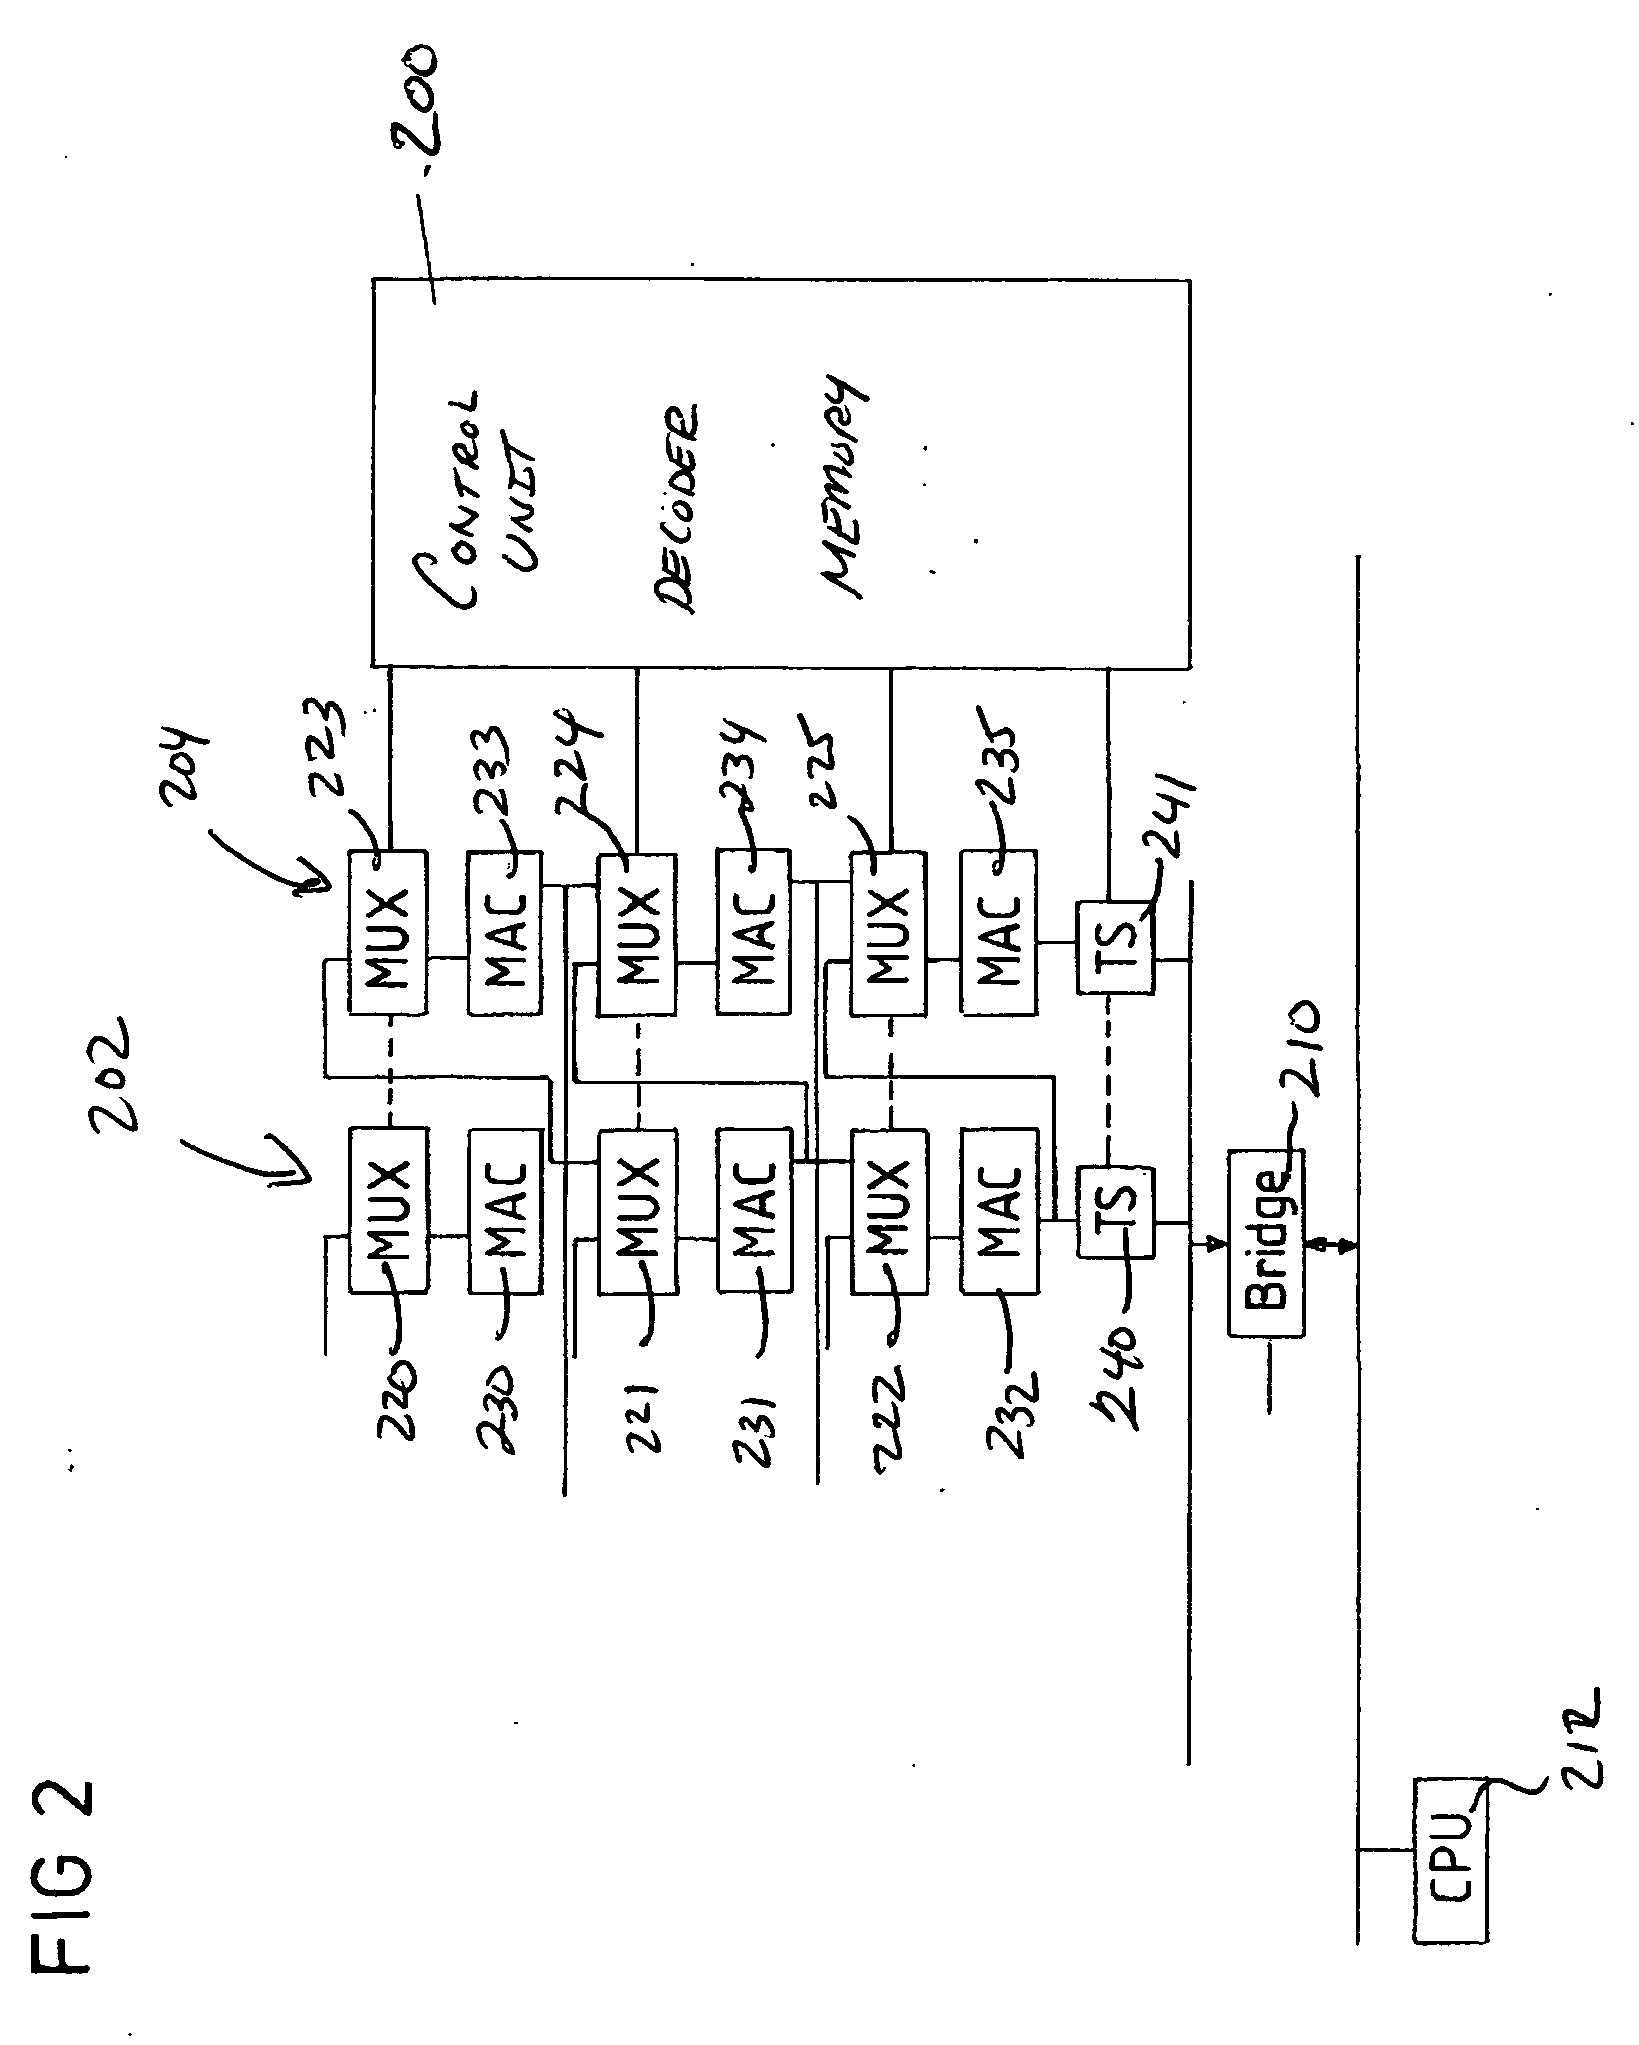 Circuit architecture for an integrated circuit